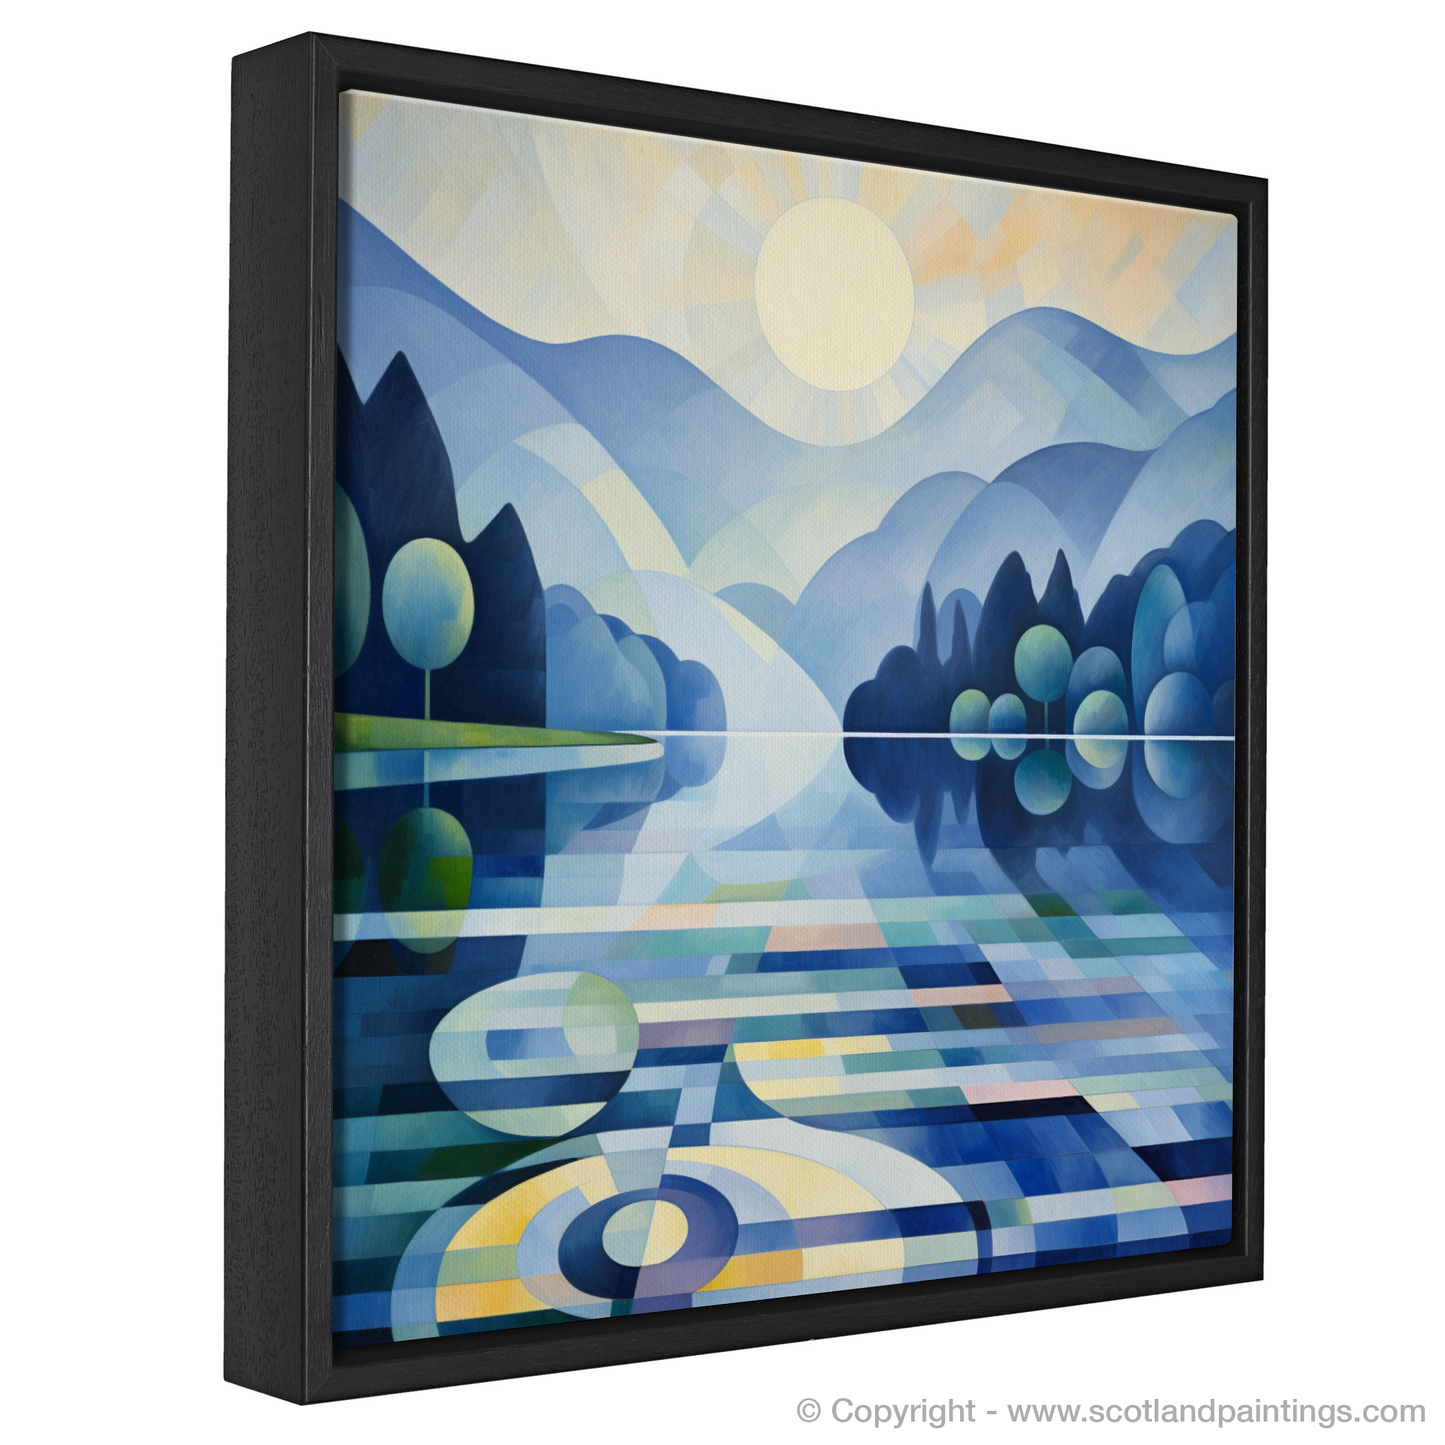 Painting and Art Print of Misty morning on Loch Lomond entitled "Misty Melodies of Loch Lomond".